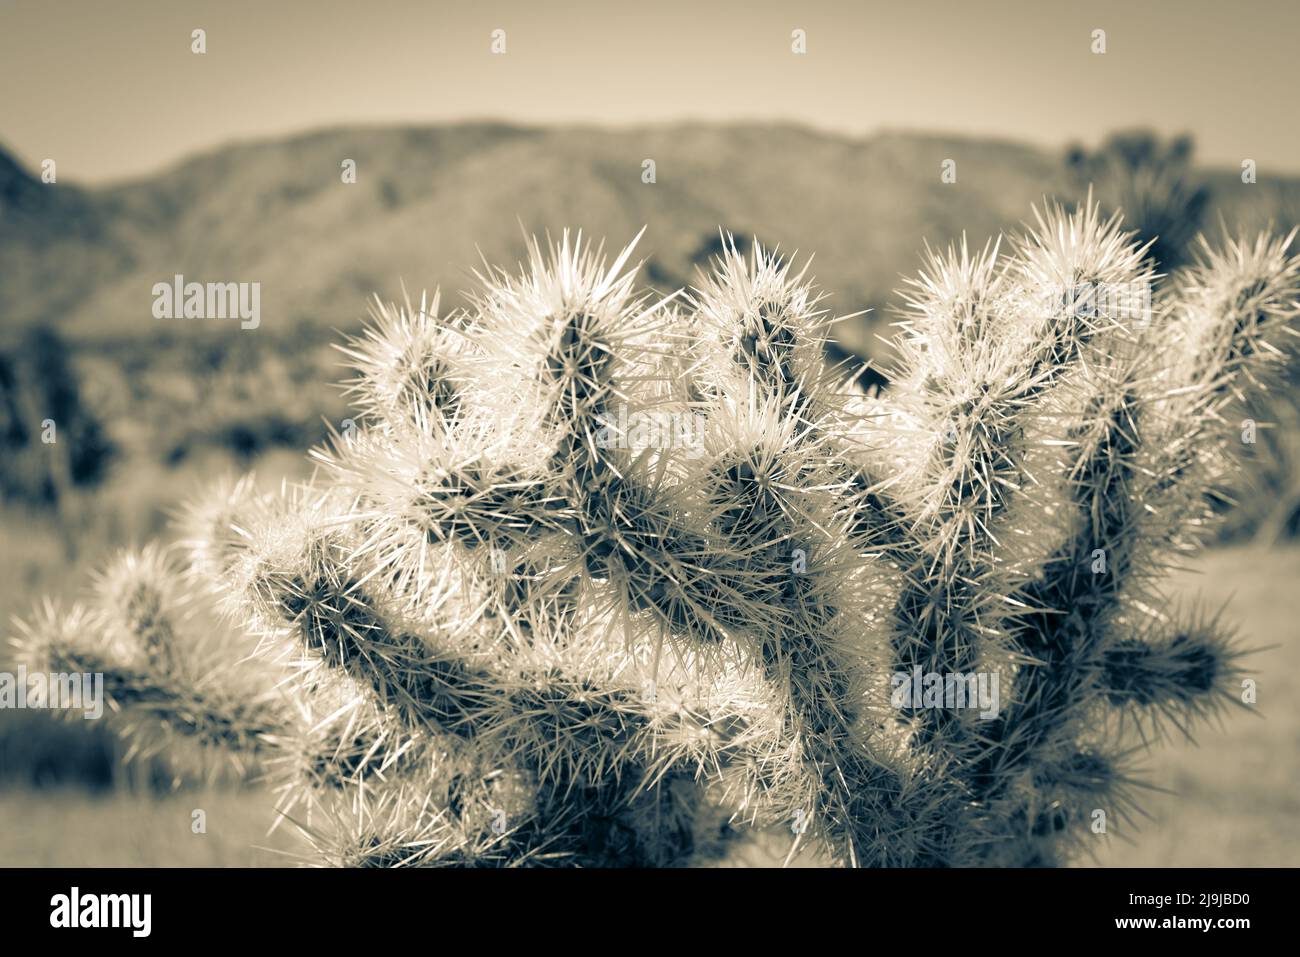 The unique Cholla cactus garden with distant mountains in Joshua tree National Park in the Mojave desert, CA Stock Photo